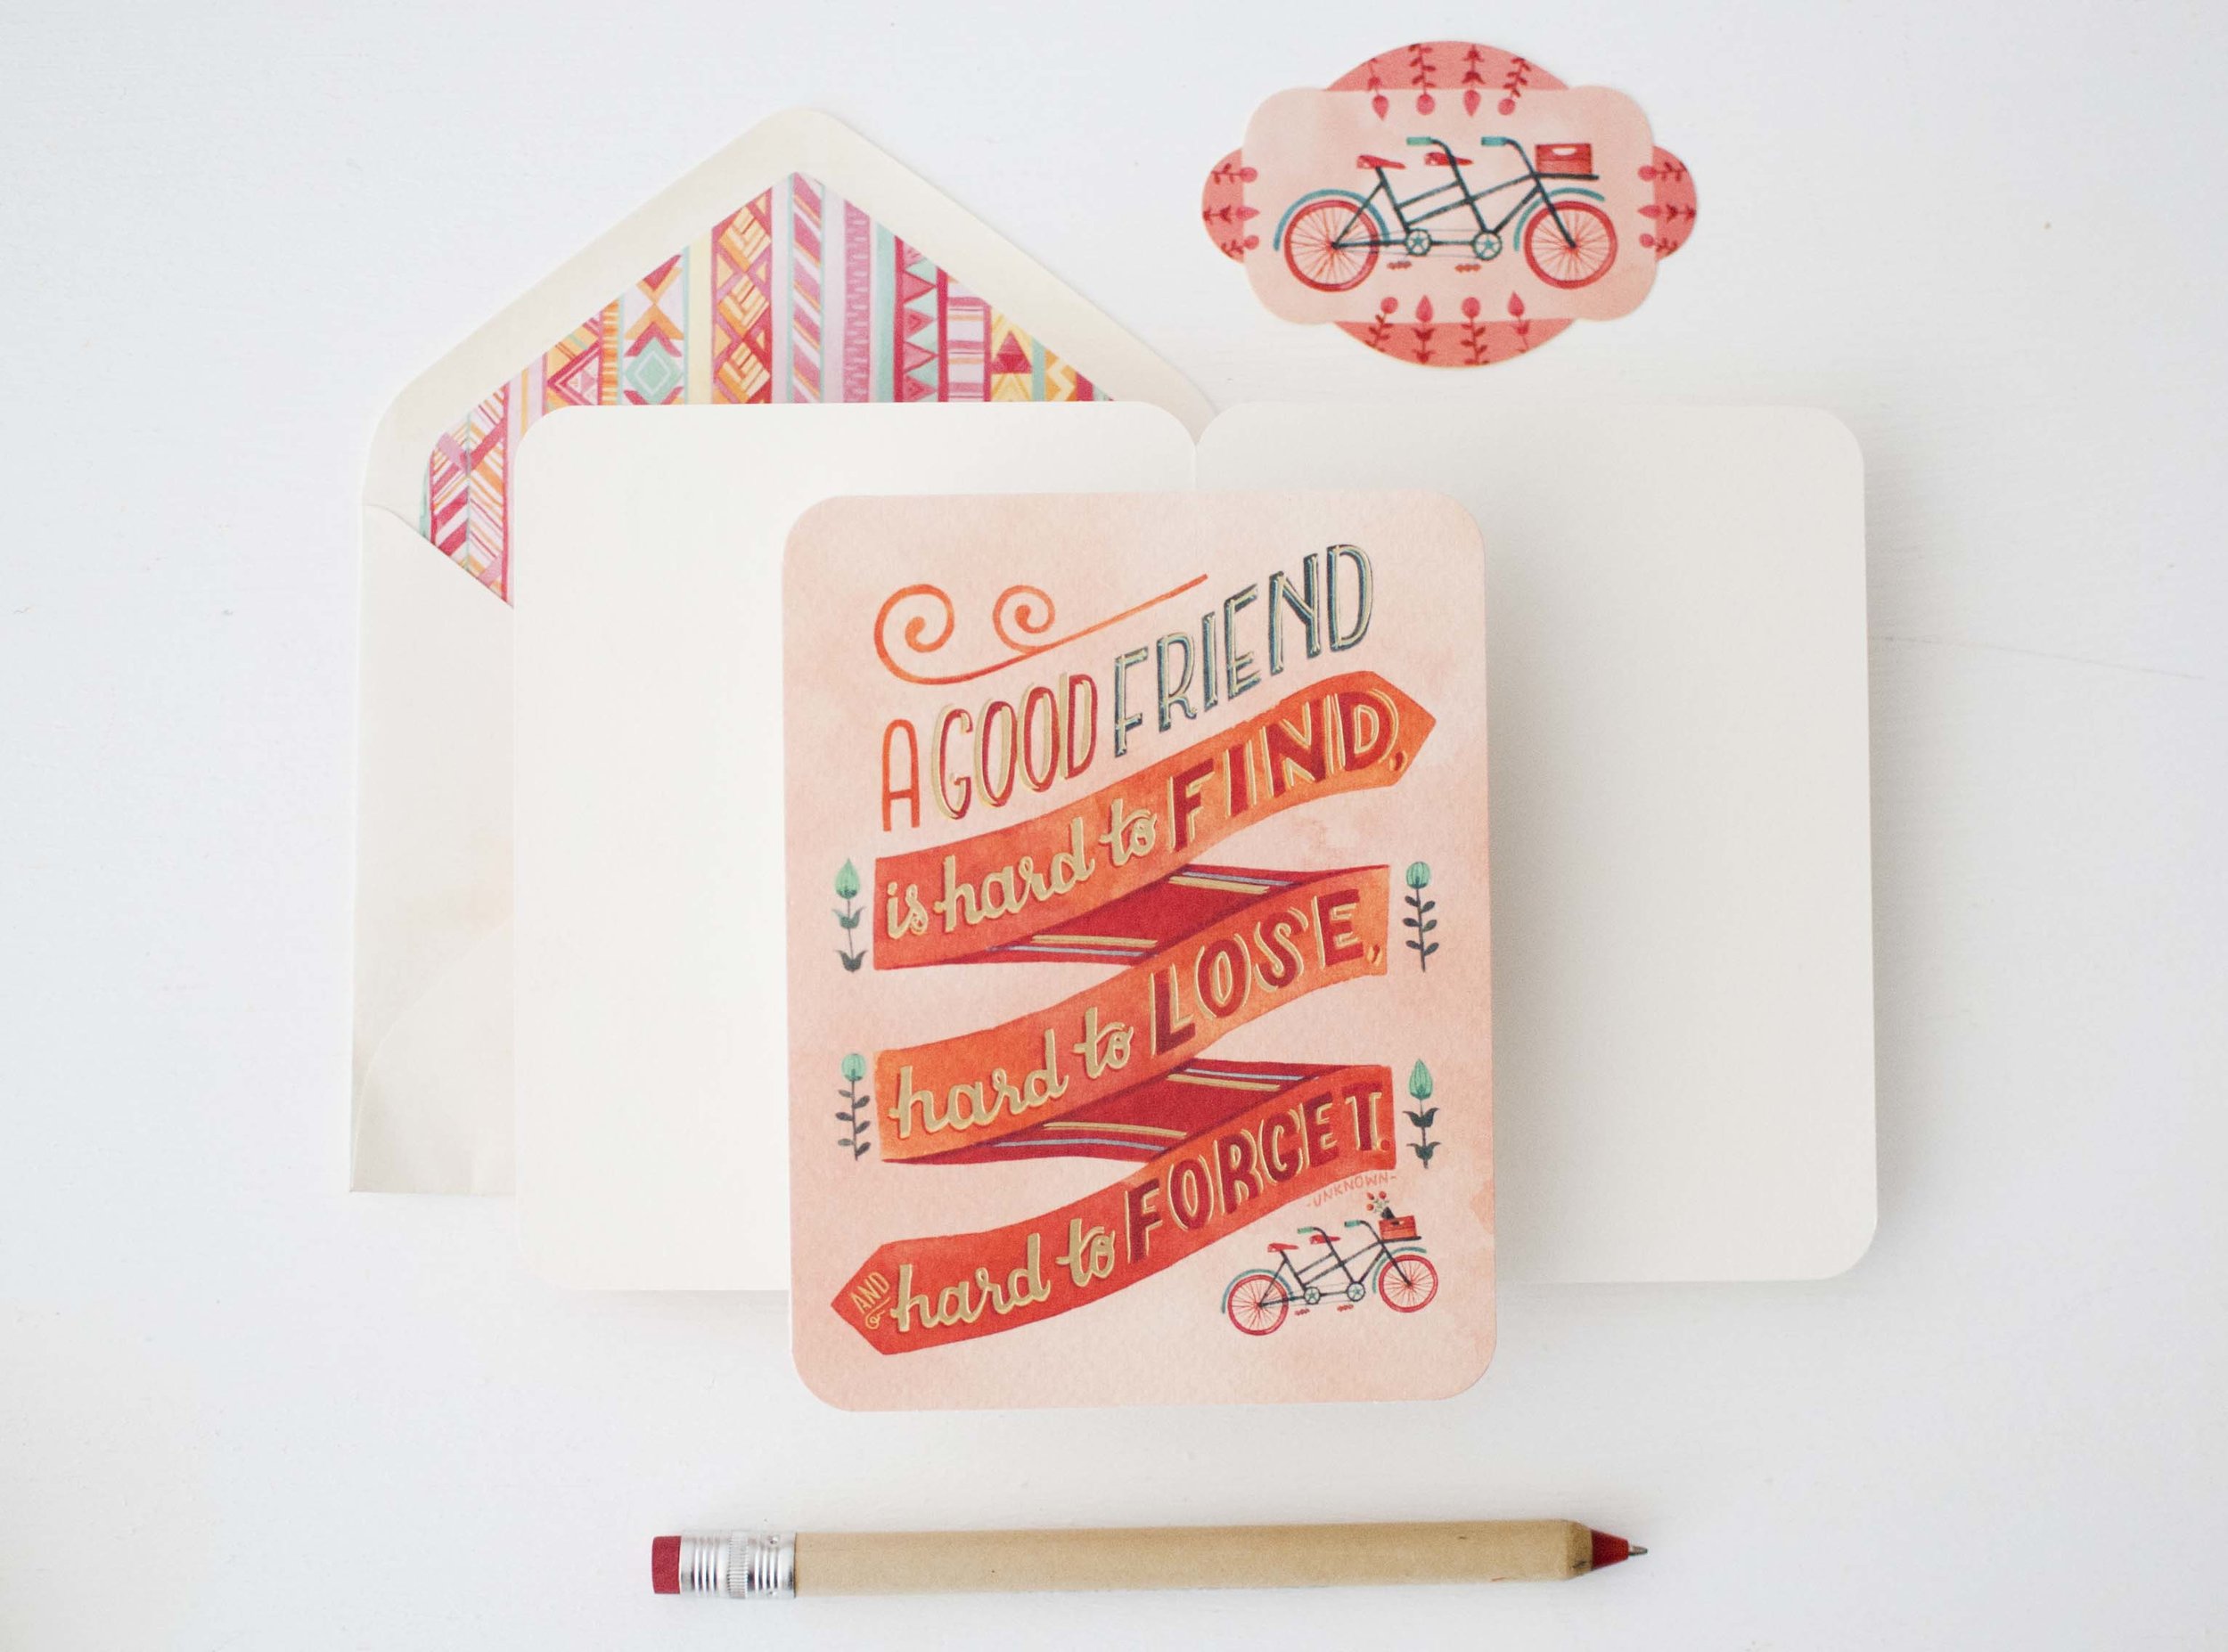 Studio Oh! Deluxe Greeting Card // Art by Becca Cahan